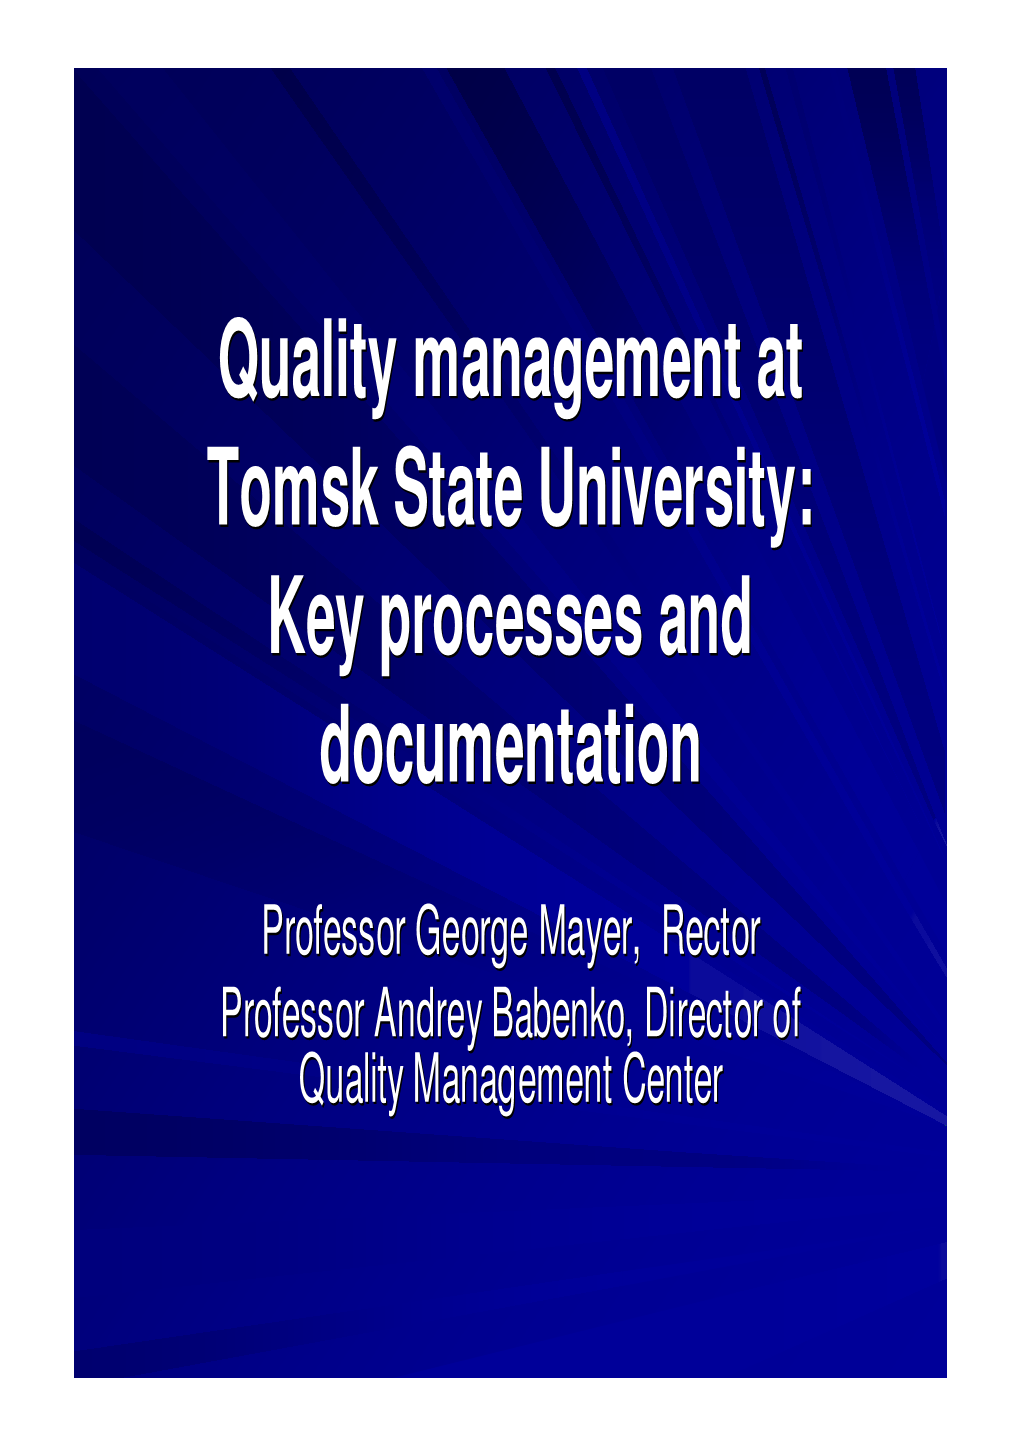 Quality Management at Tomsk State University: Key Processes and Documentation